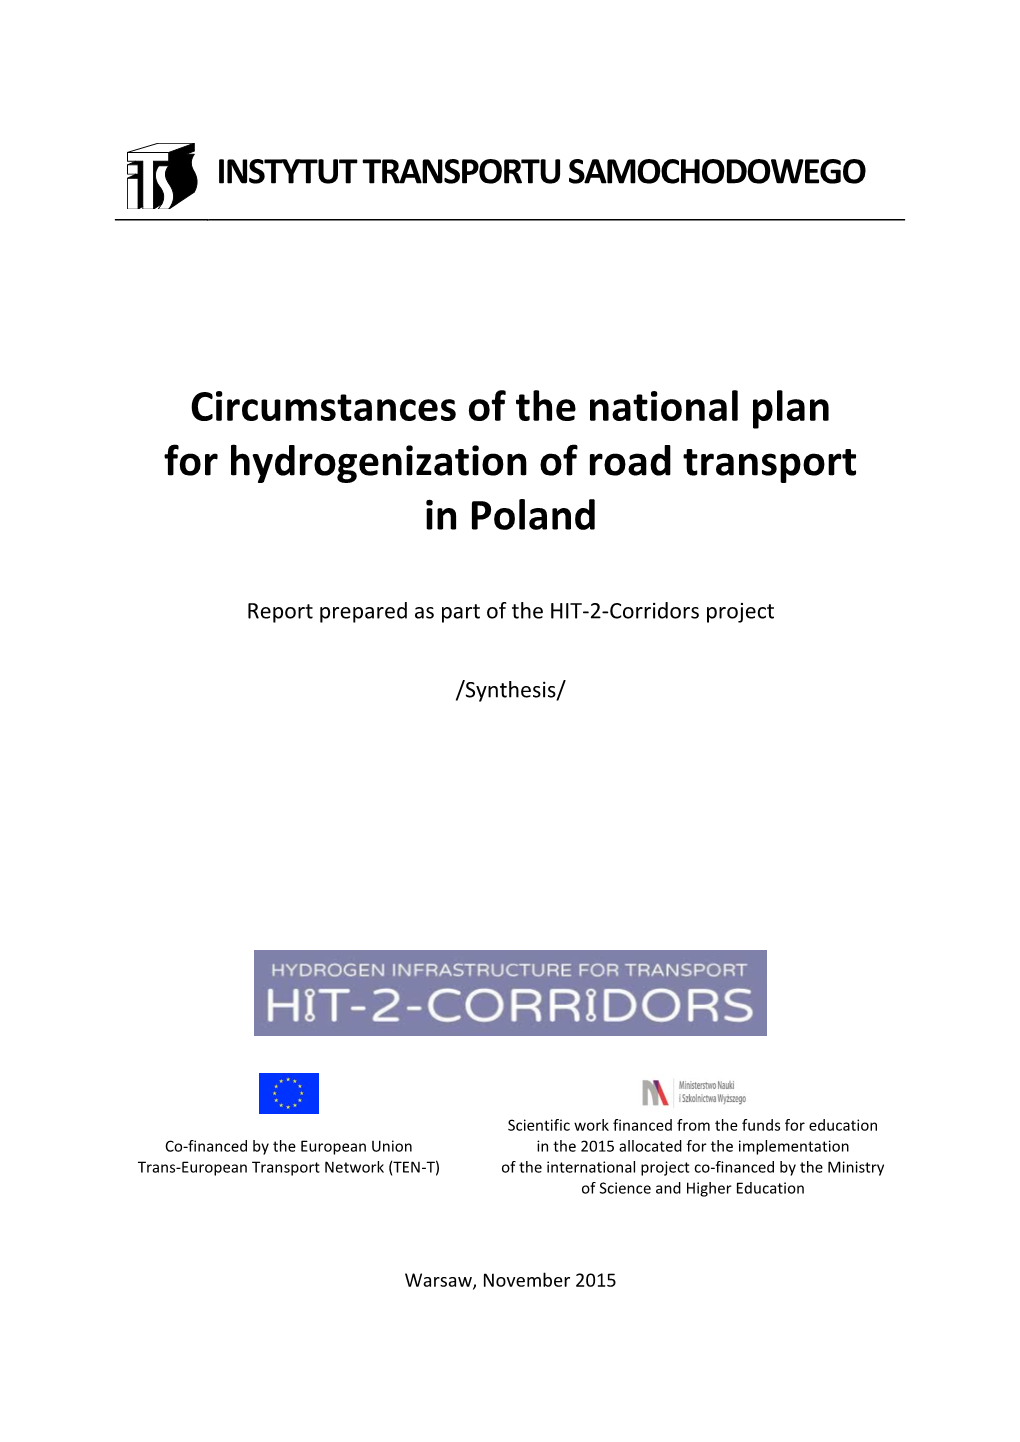 Circumstances of the National Plan for Hydrogenization of Road Transport in Poland